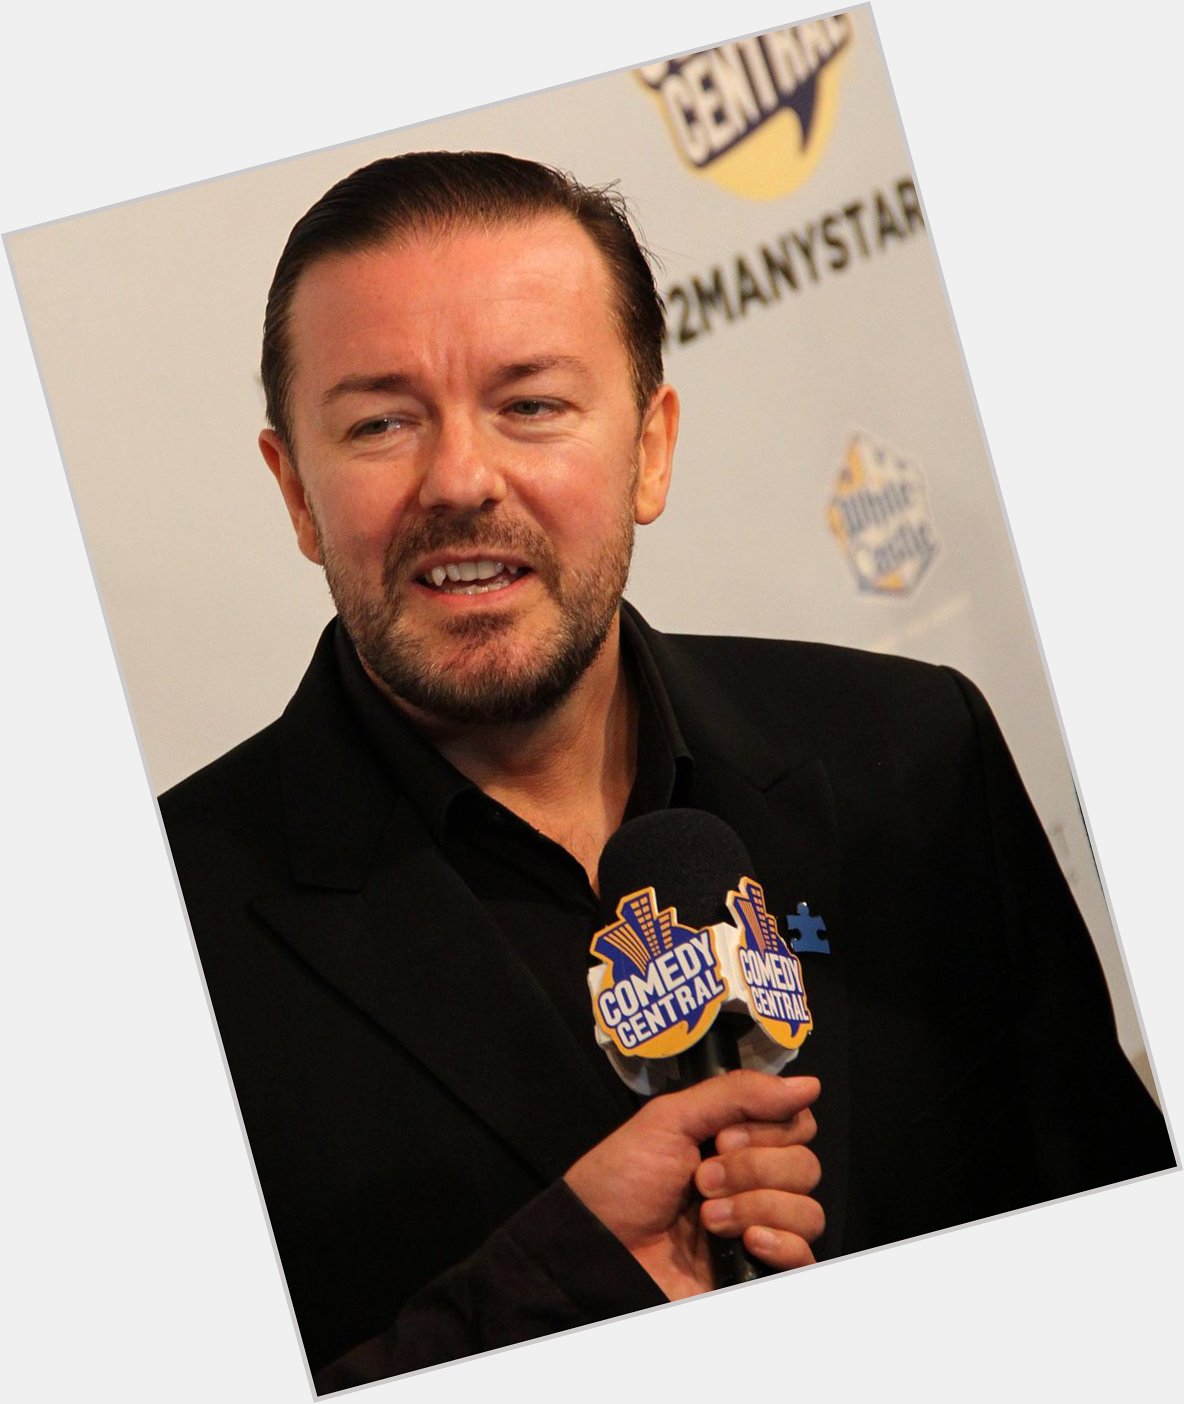 Happy Birthday to Ricky Gervais, who turns 54 today! 